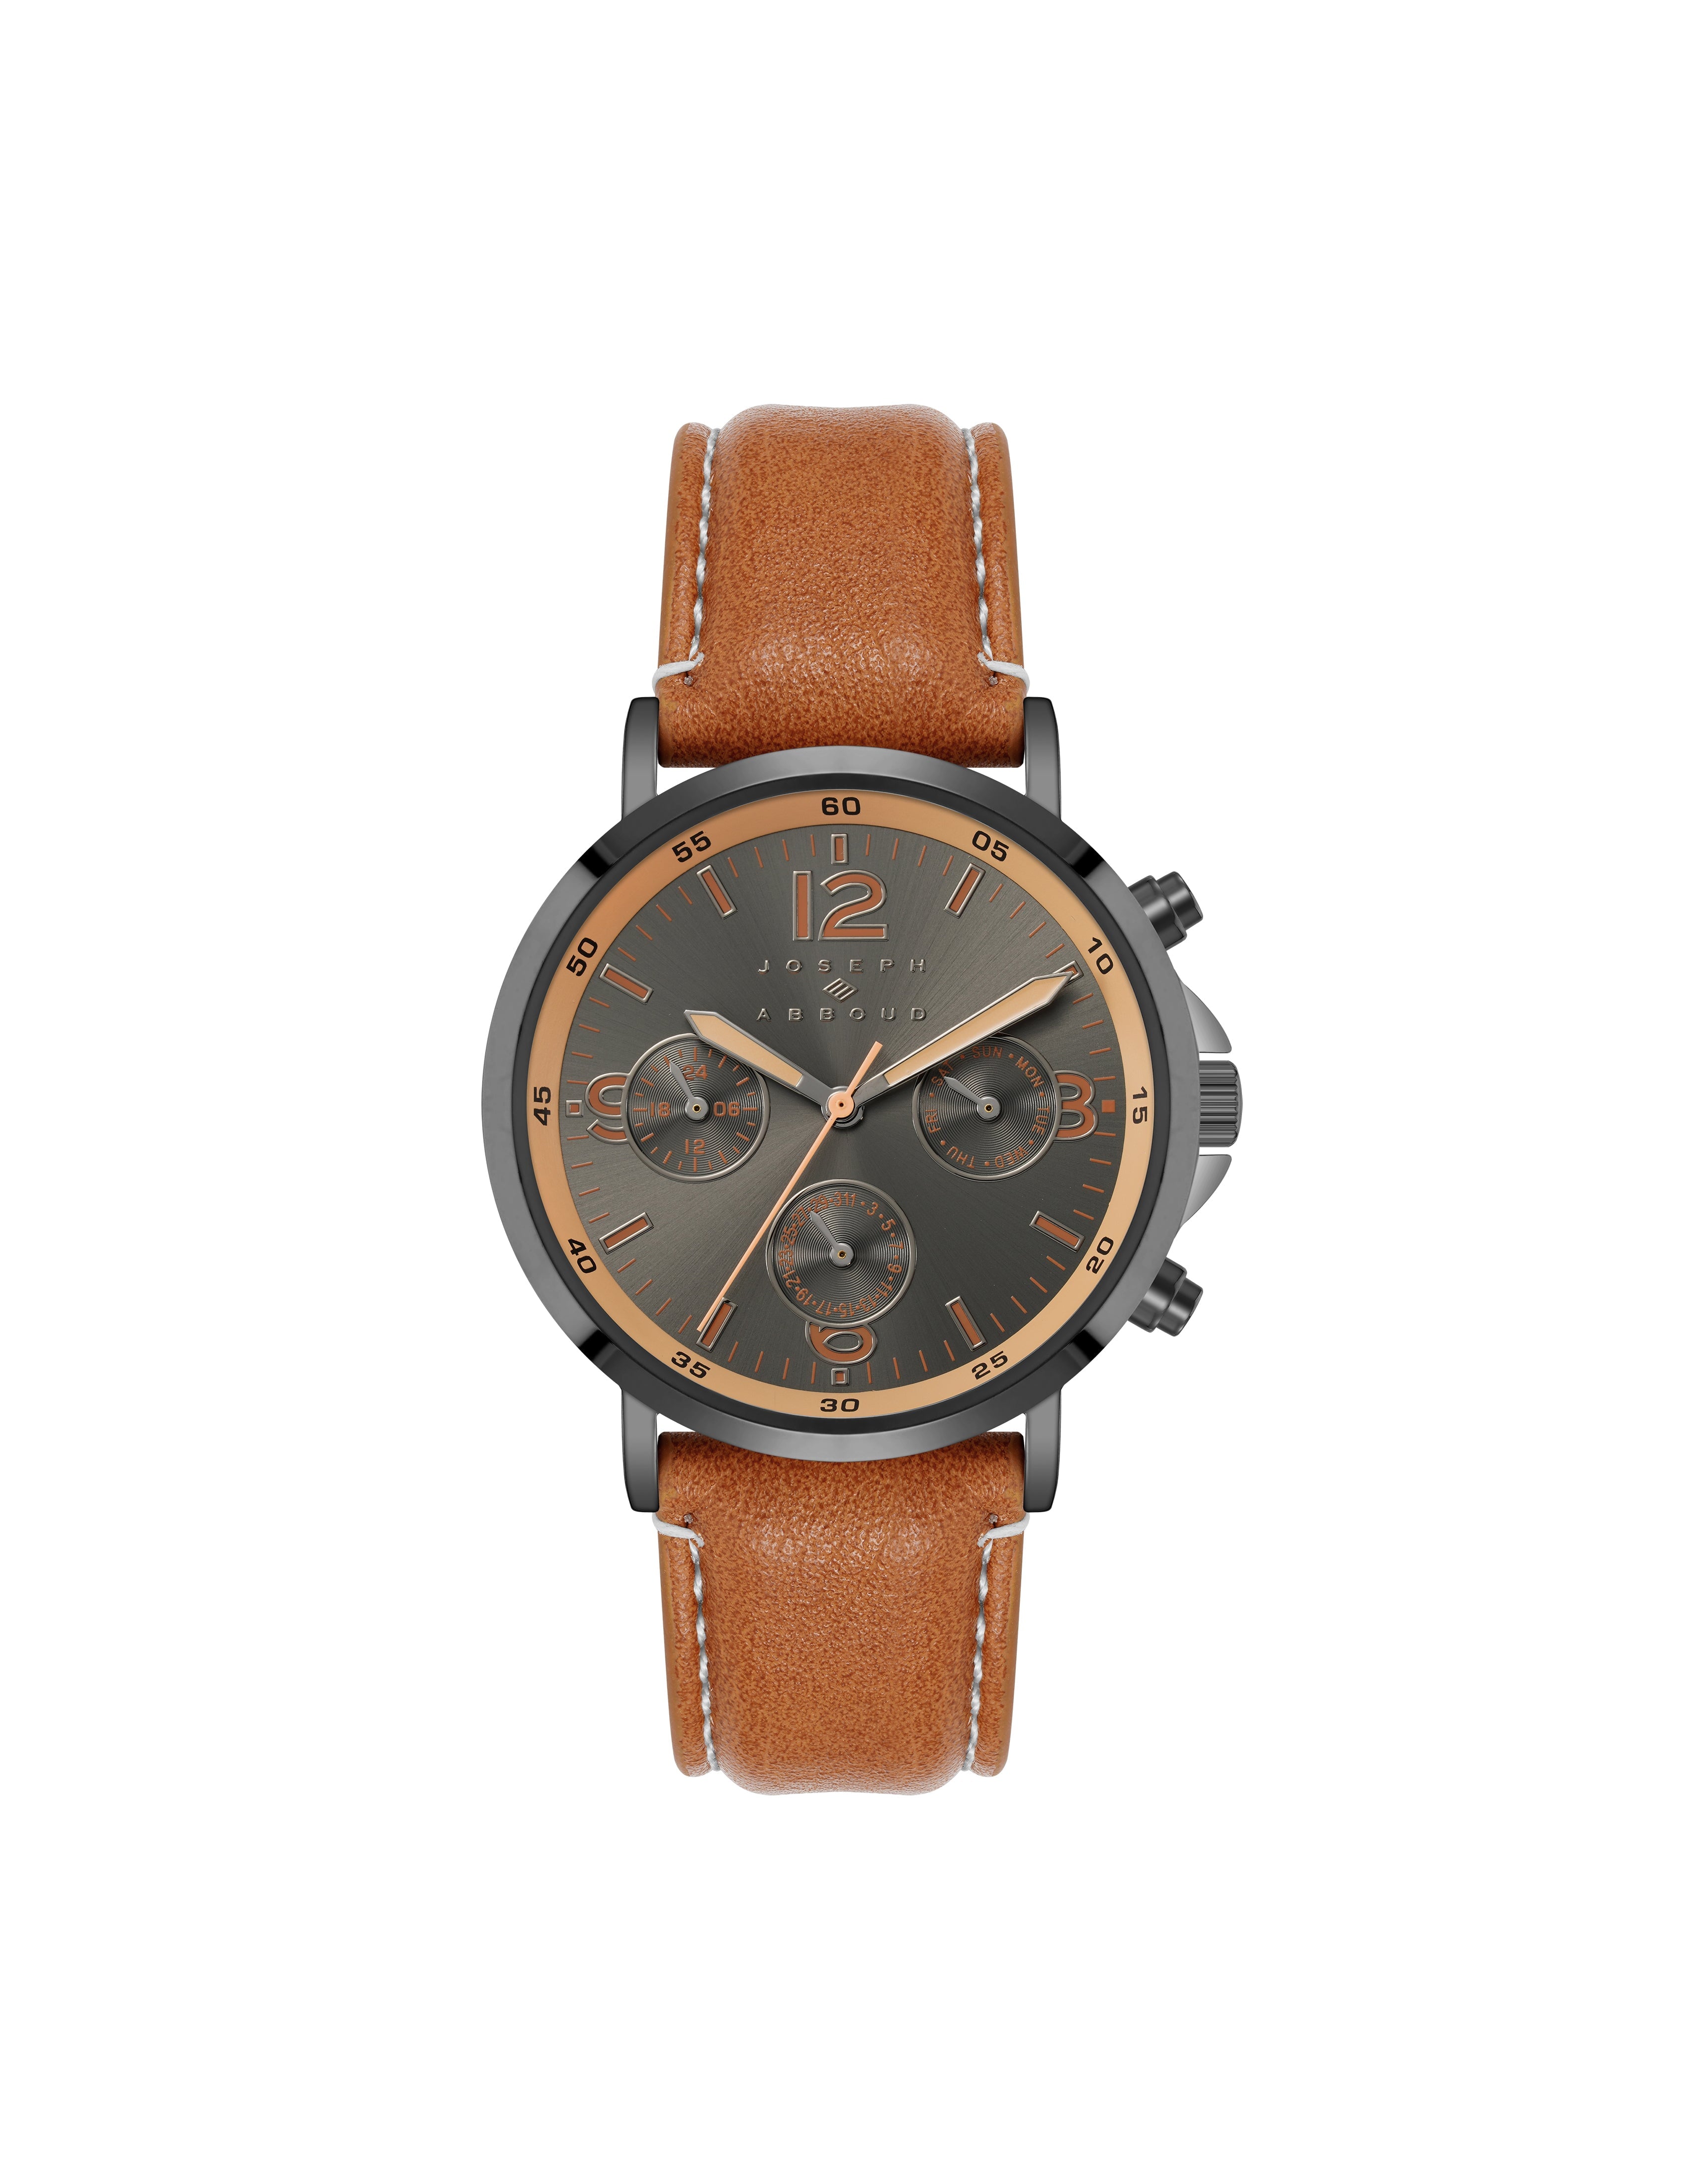 Men's (Faux) Leather Grey Dial Watch